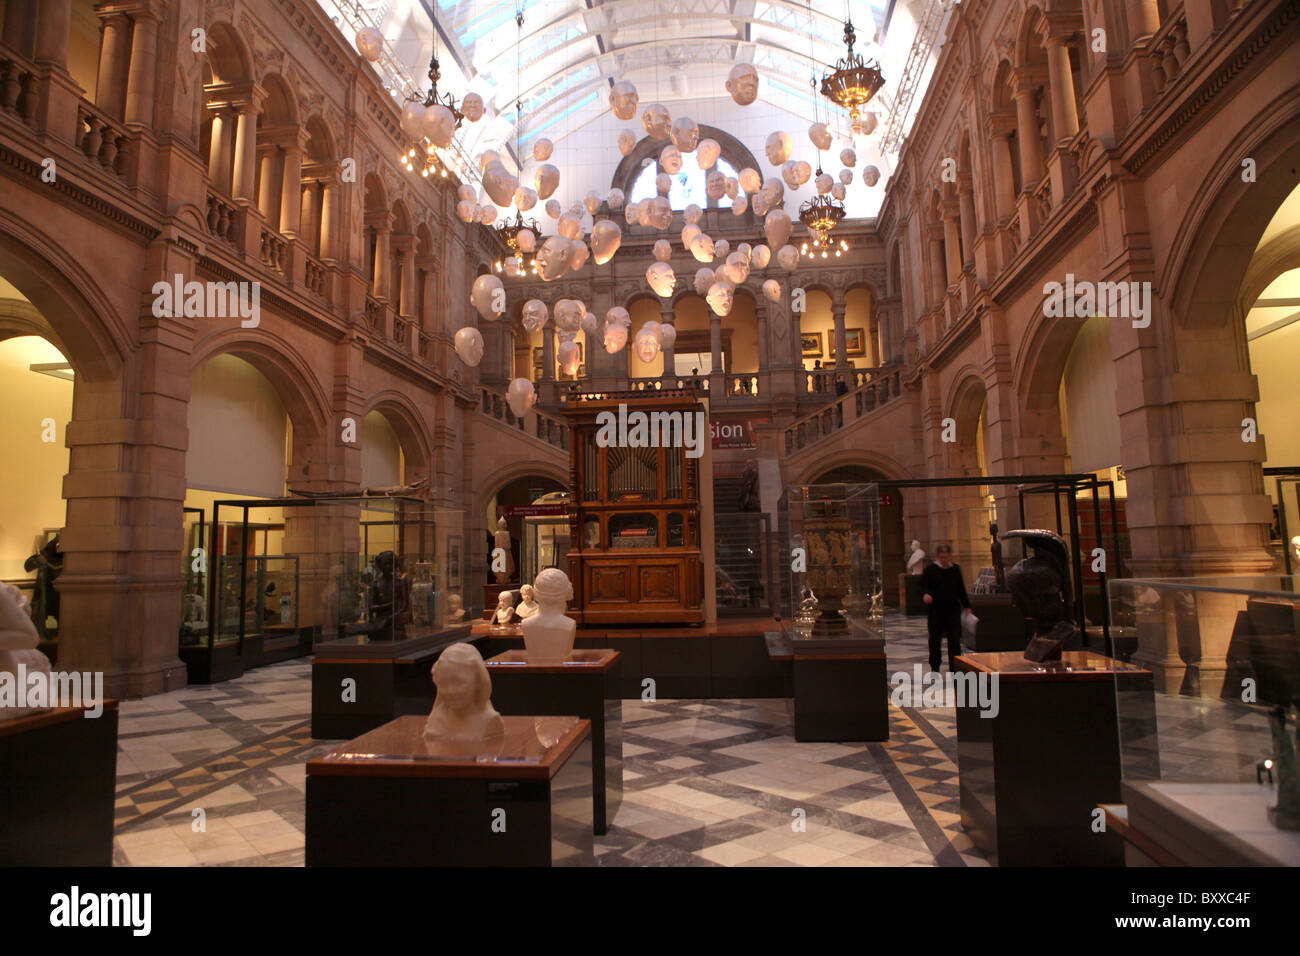 Interior of the Kelvingrove Art Gallery and Museum in Glasgow, Scotland. Stock Photo